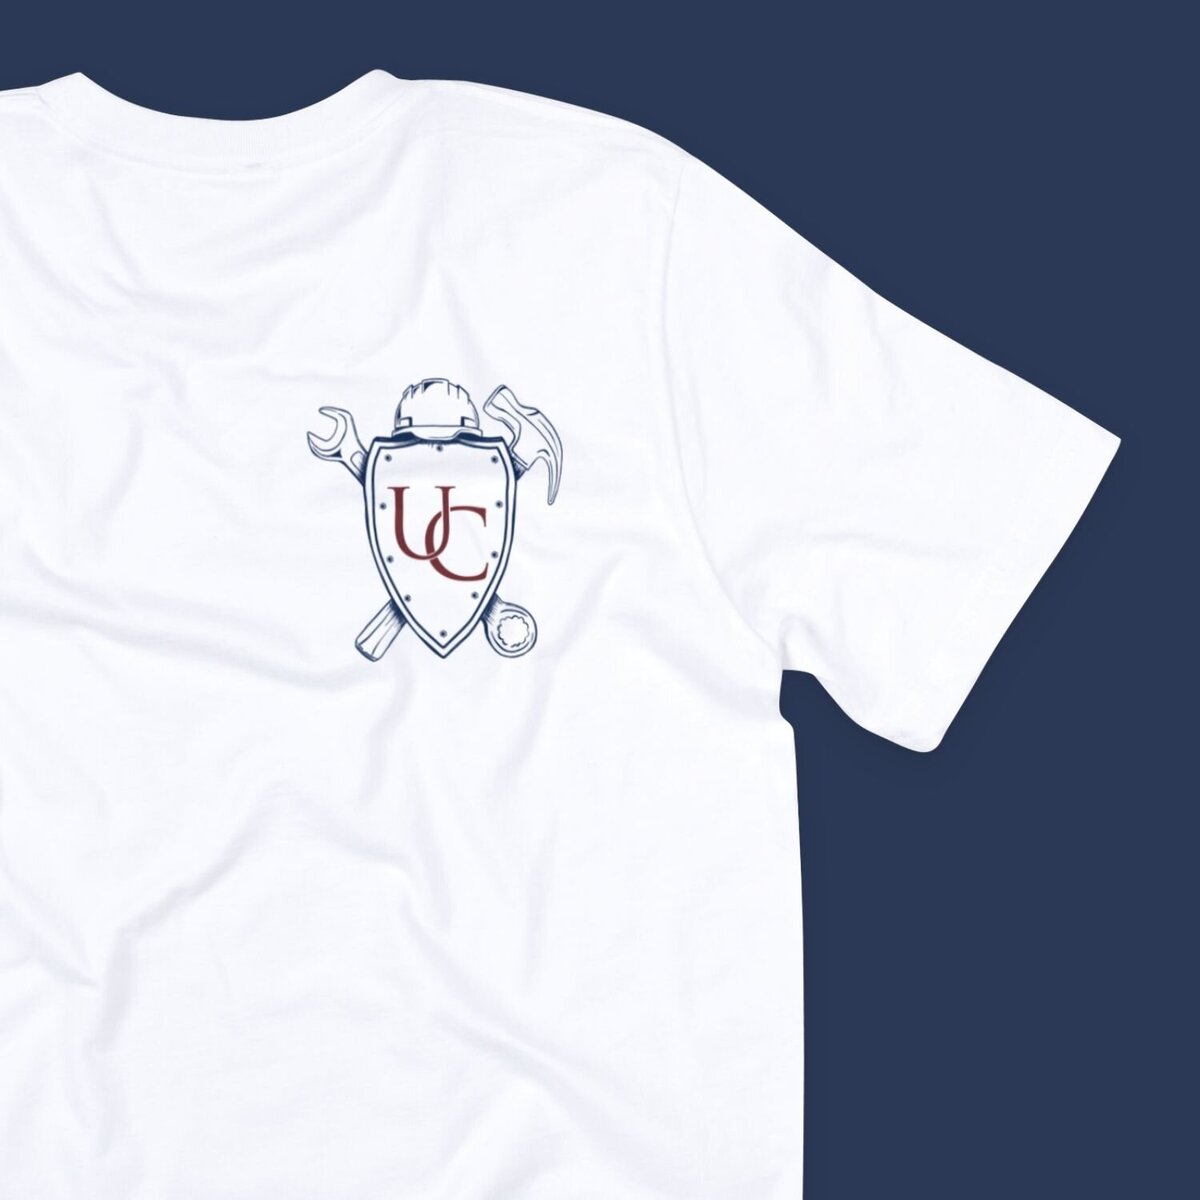 Custom logo for contractor printed on a T-shirt mockup